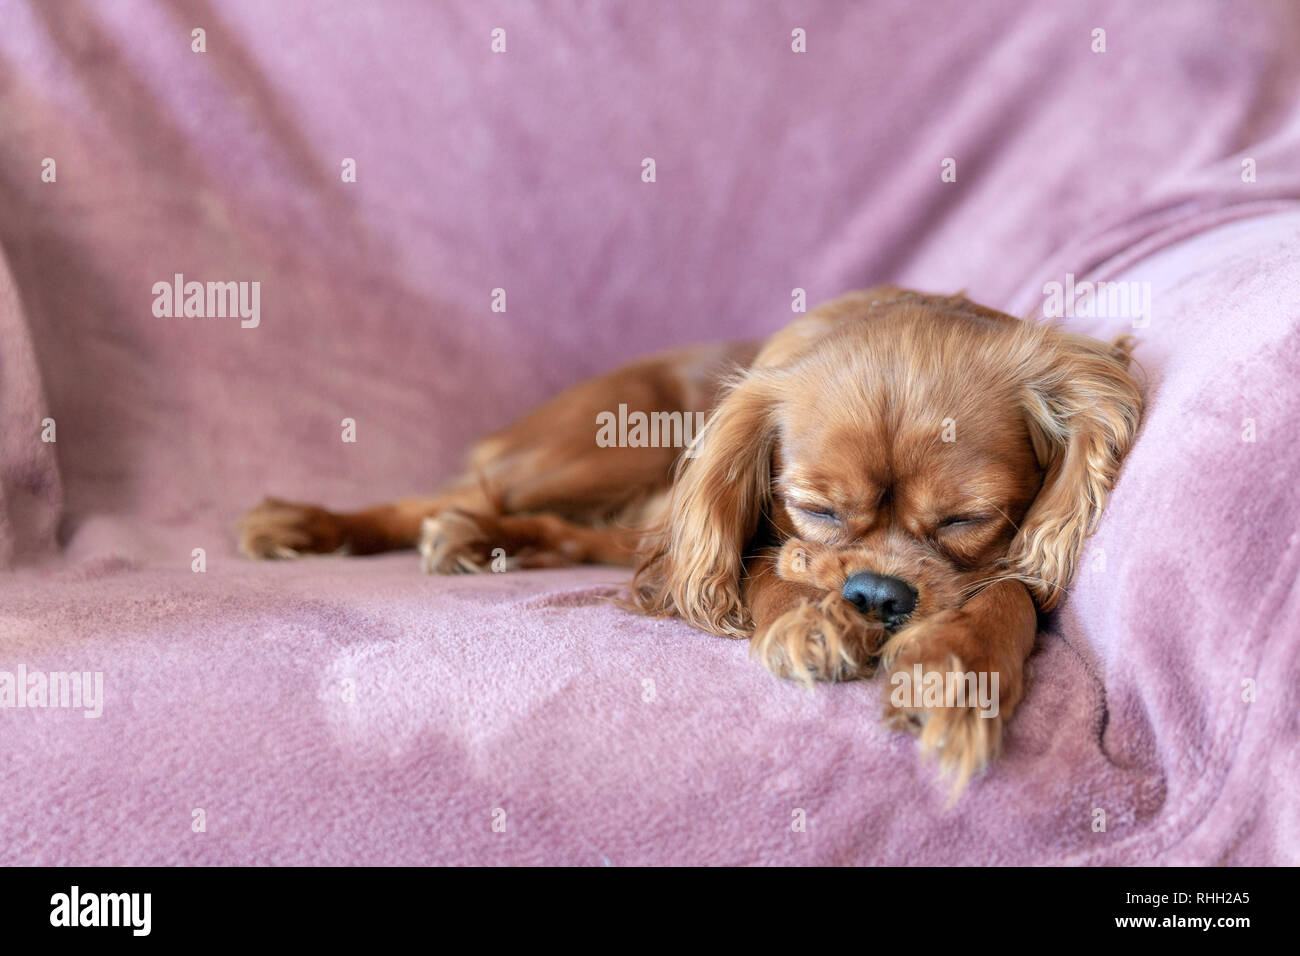 Cute puppy sleeping on the pink blanket Stock Photo